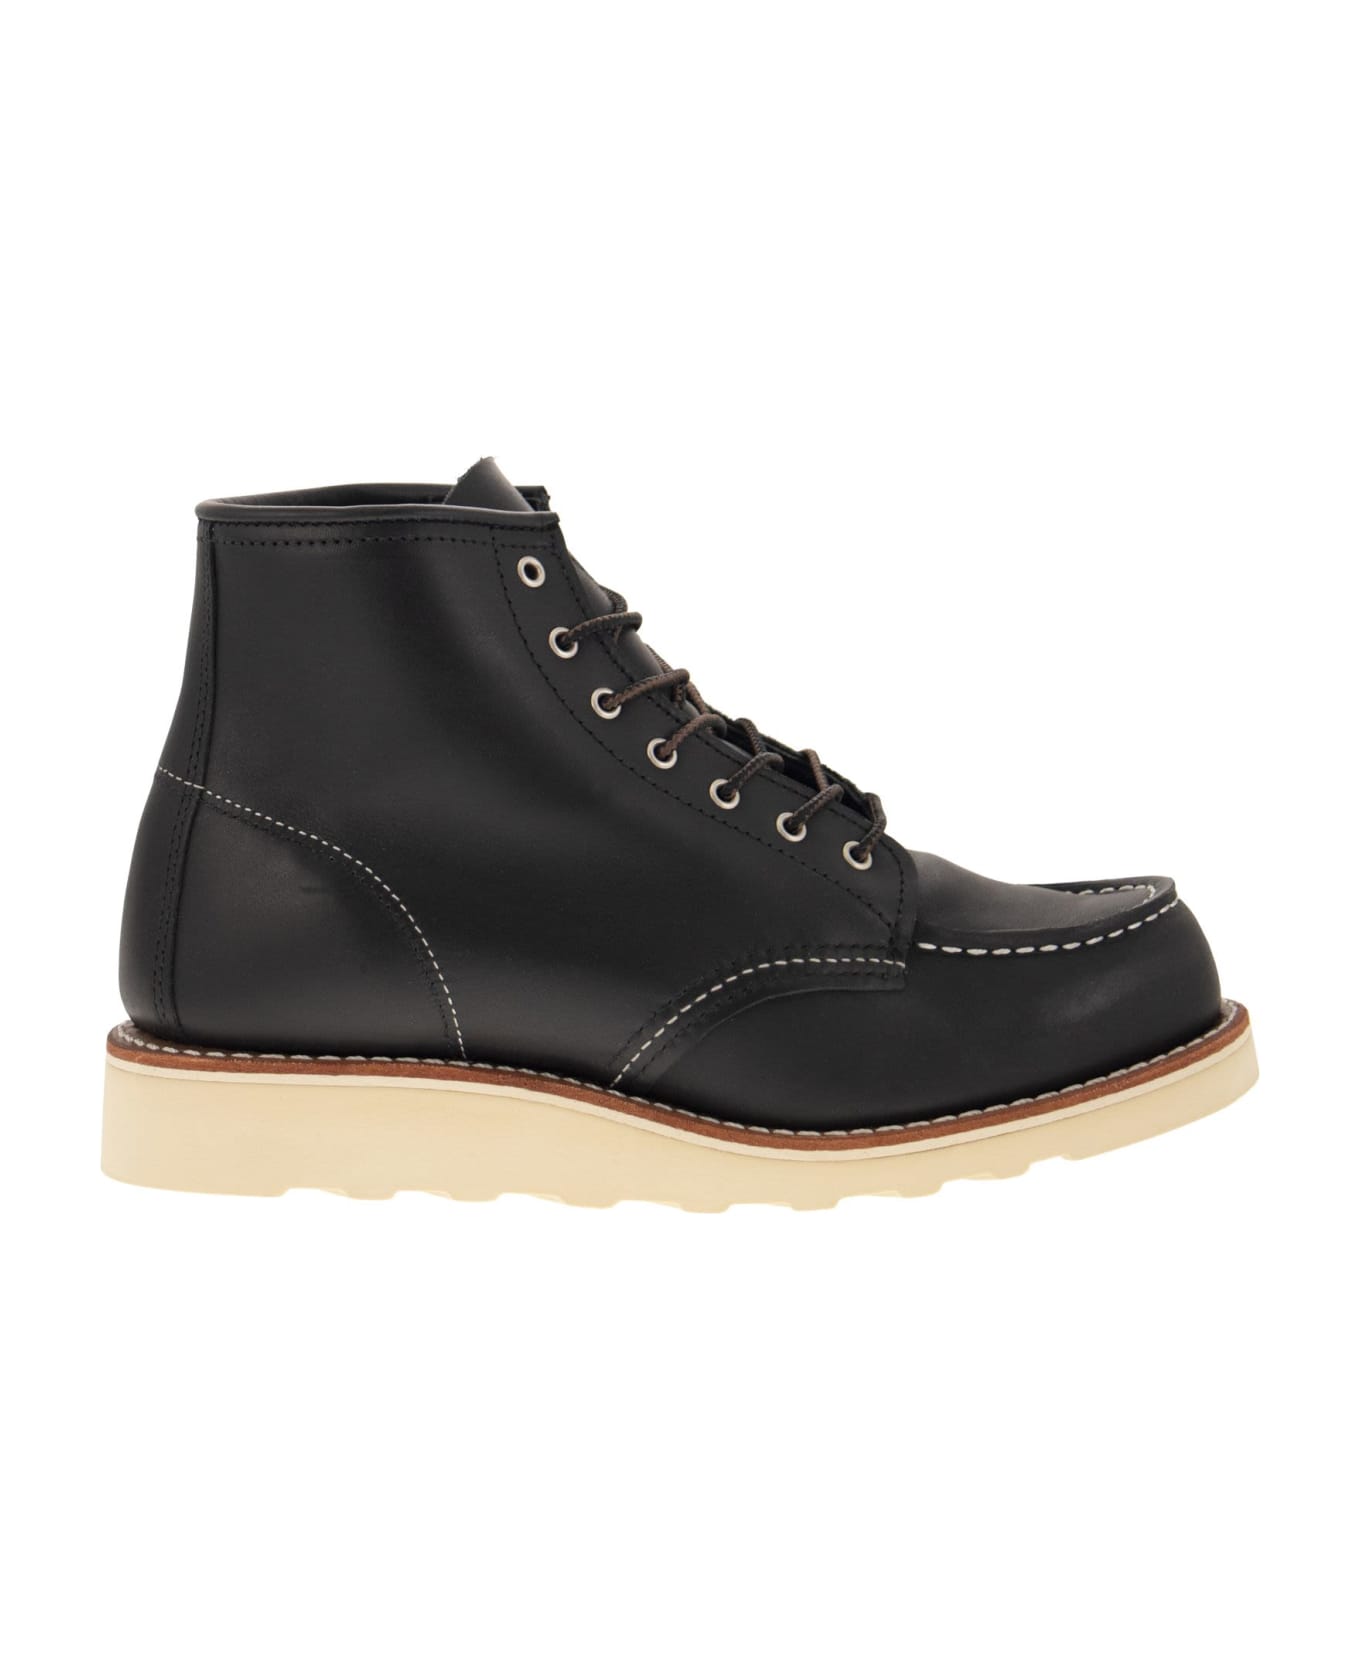 Red Wing Classic Moc - Leather Ankle Boot - Black ブーツ